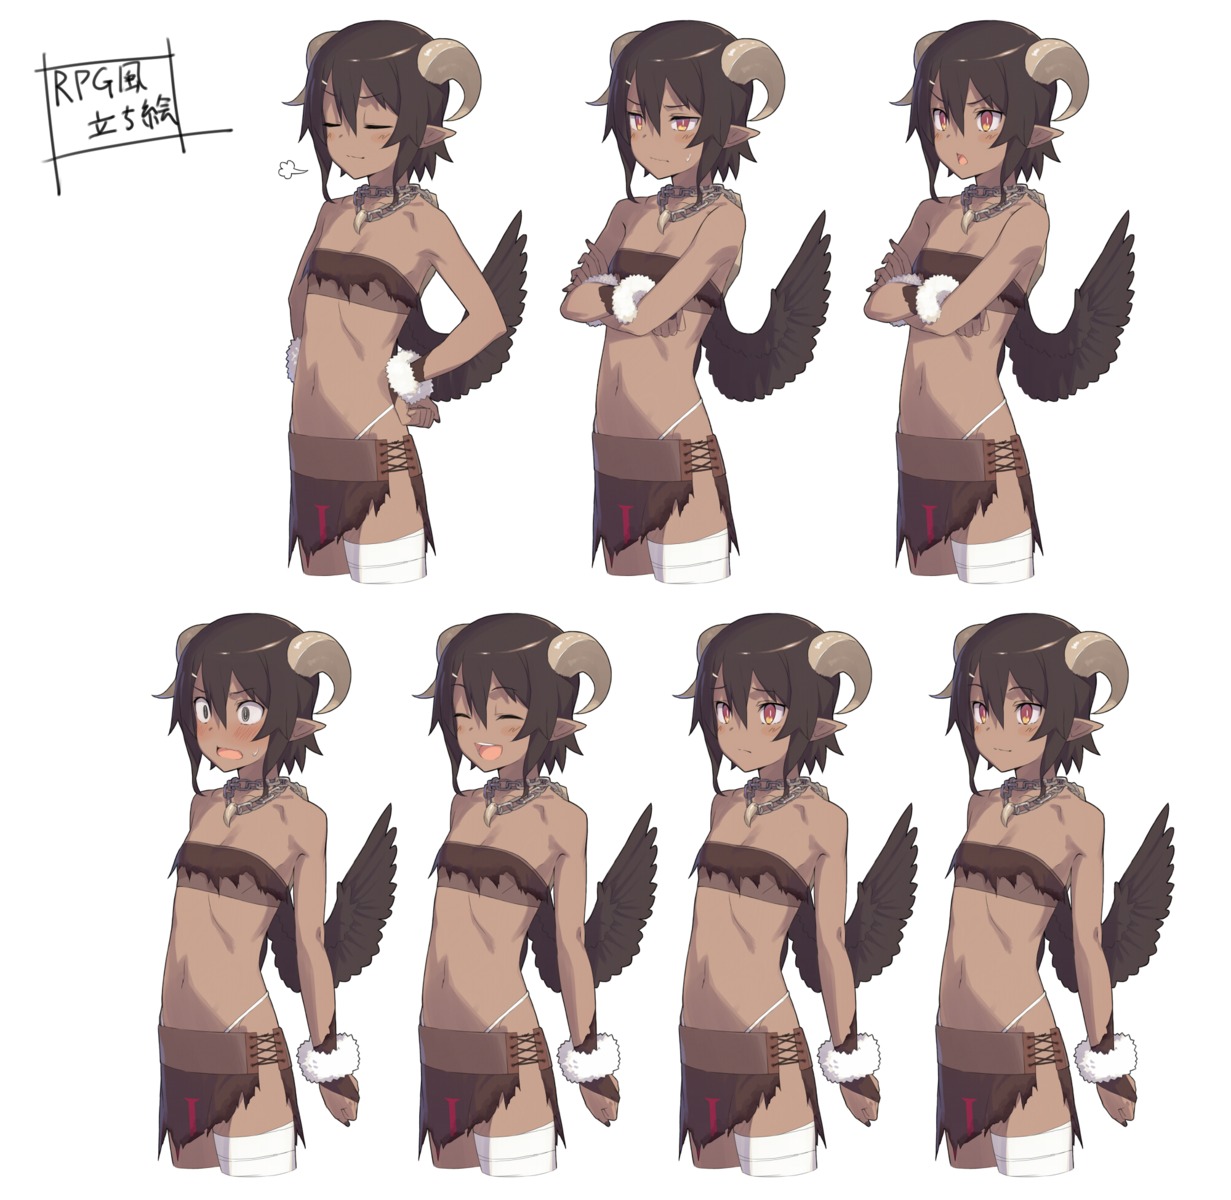 bandages bikini cleavage expression horns kinta_(distortion) pointy_ears swimsuits torn_clothes wings